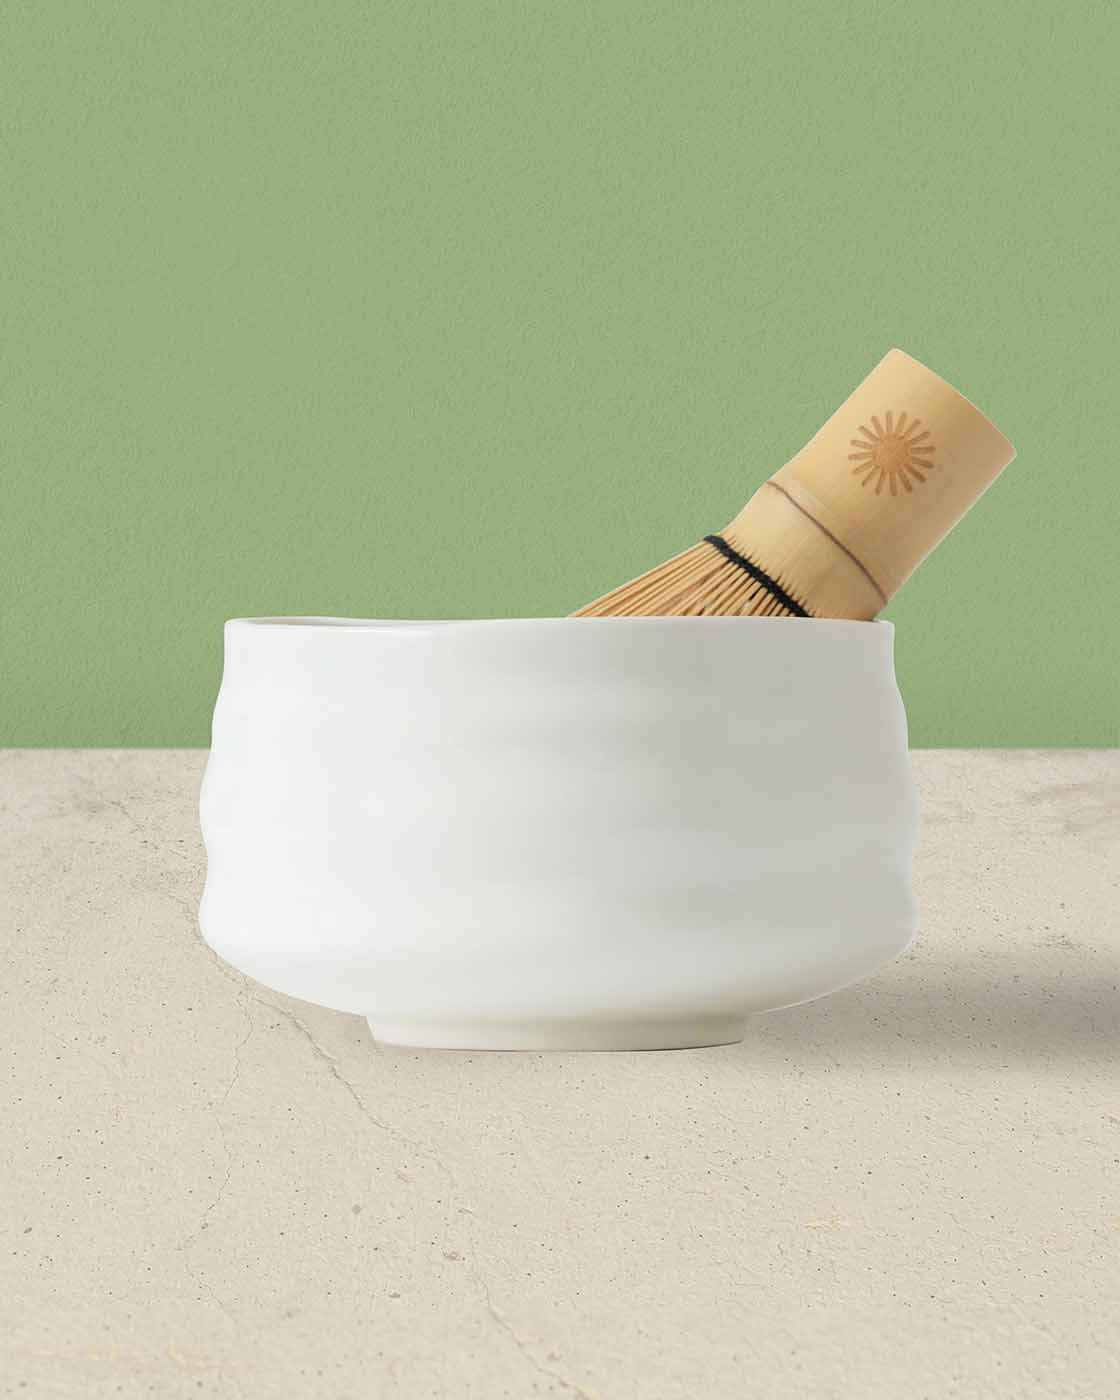 Handmade Chawan Matcha Bowl with bamboo whisk, the perfect tools to prepare your cup of matcha green tea